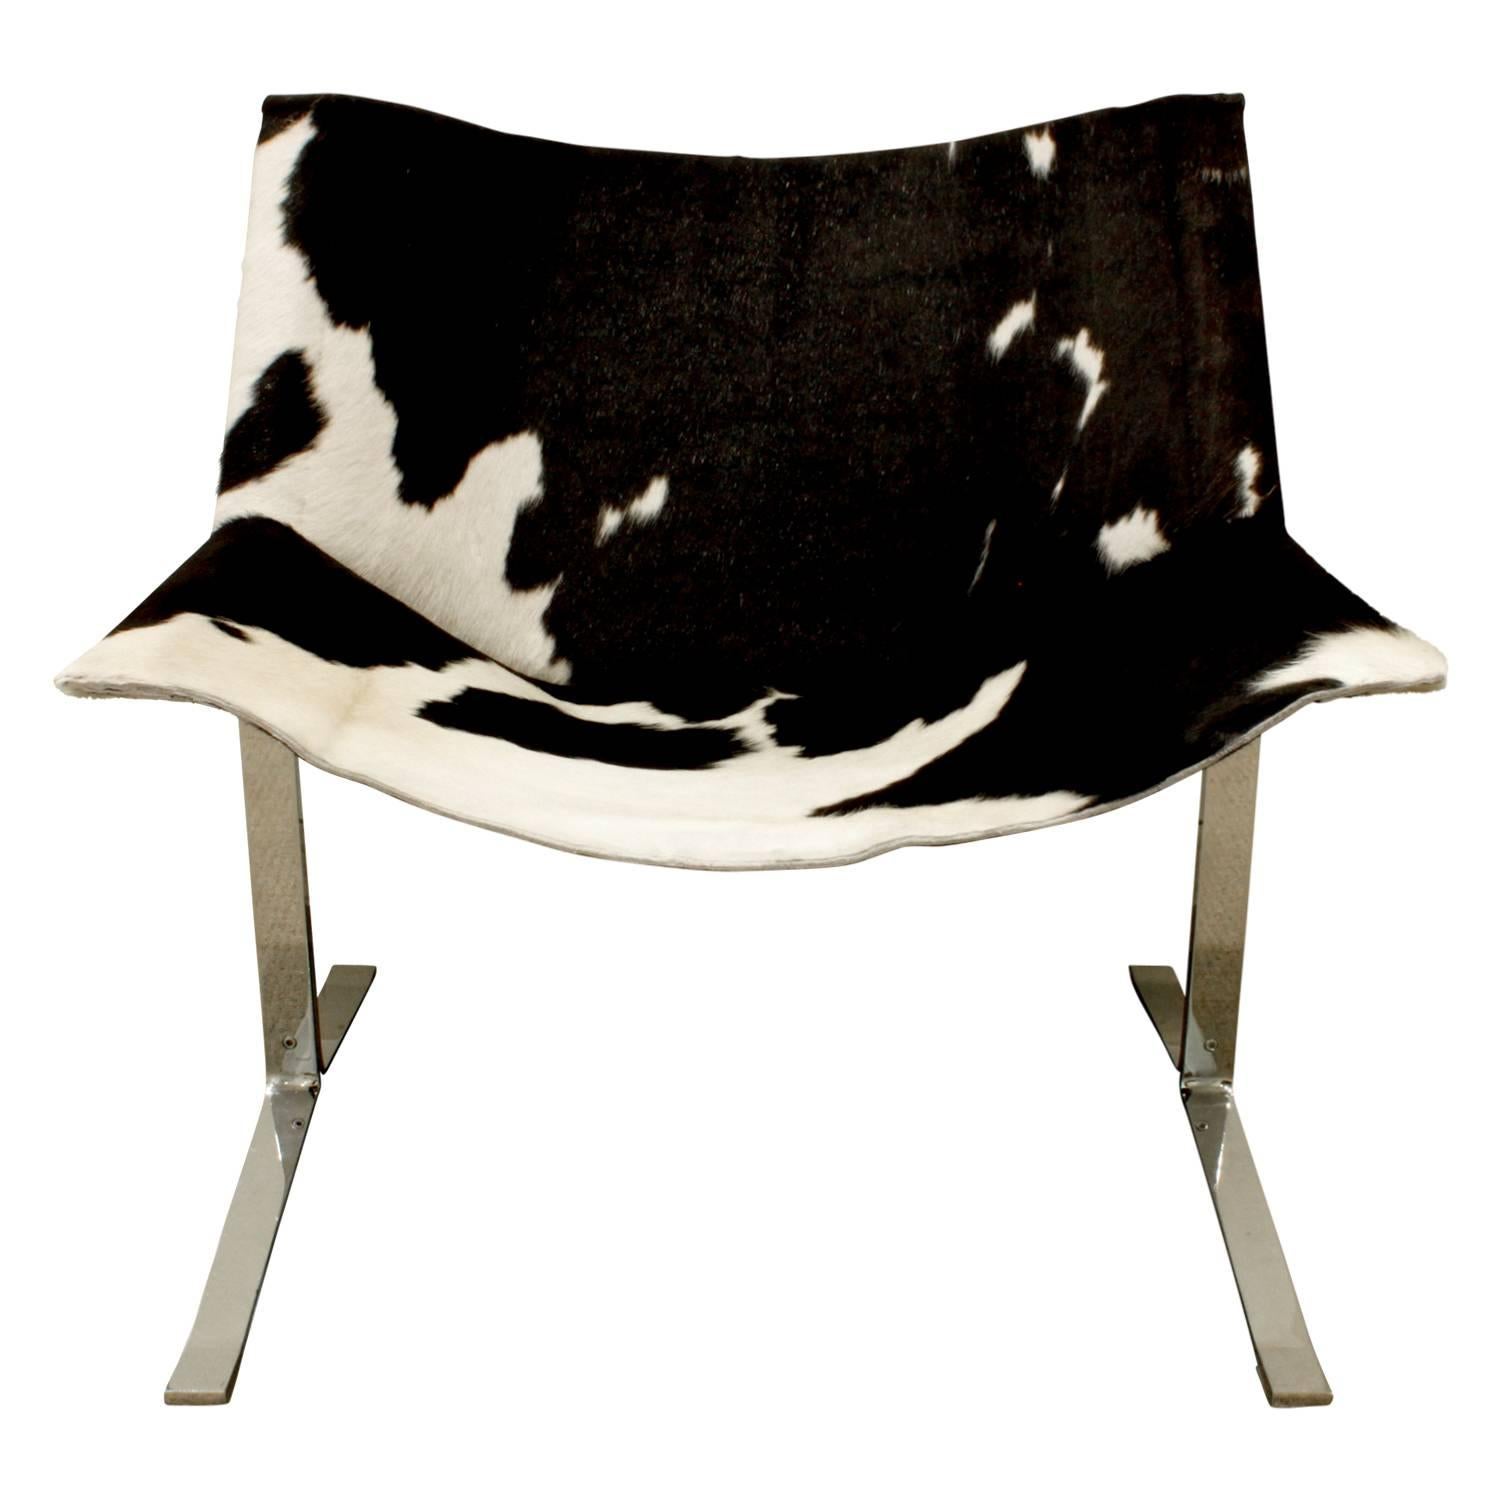 Pair of sling chairs in polished steel with new cow hide seats and backs by Clemente Meadmore, American, 1963. Newly upholstered by Lobel Modern.